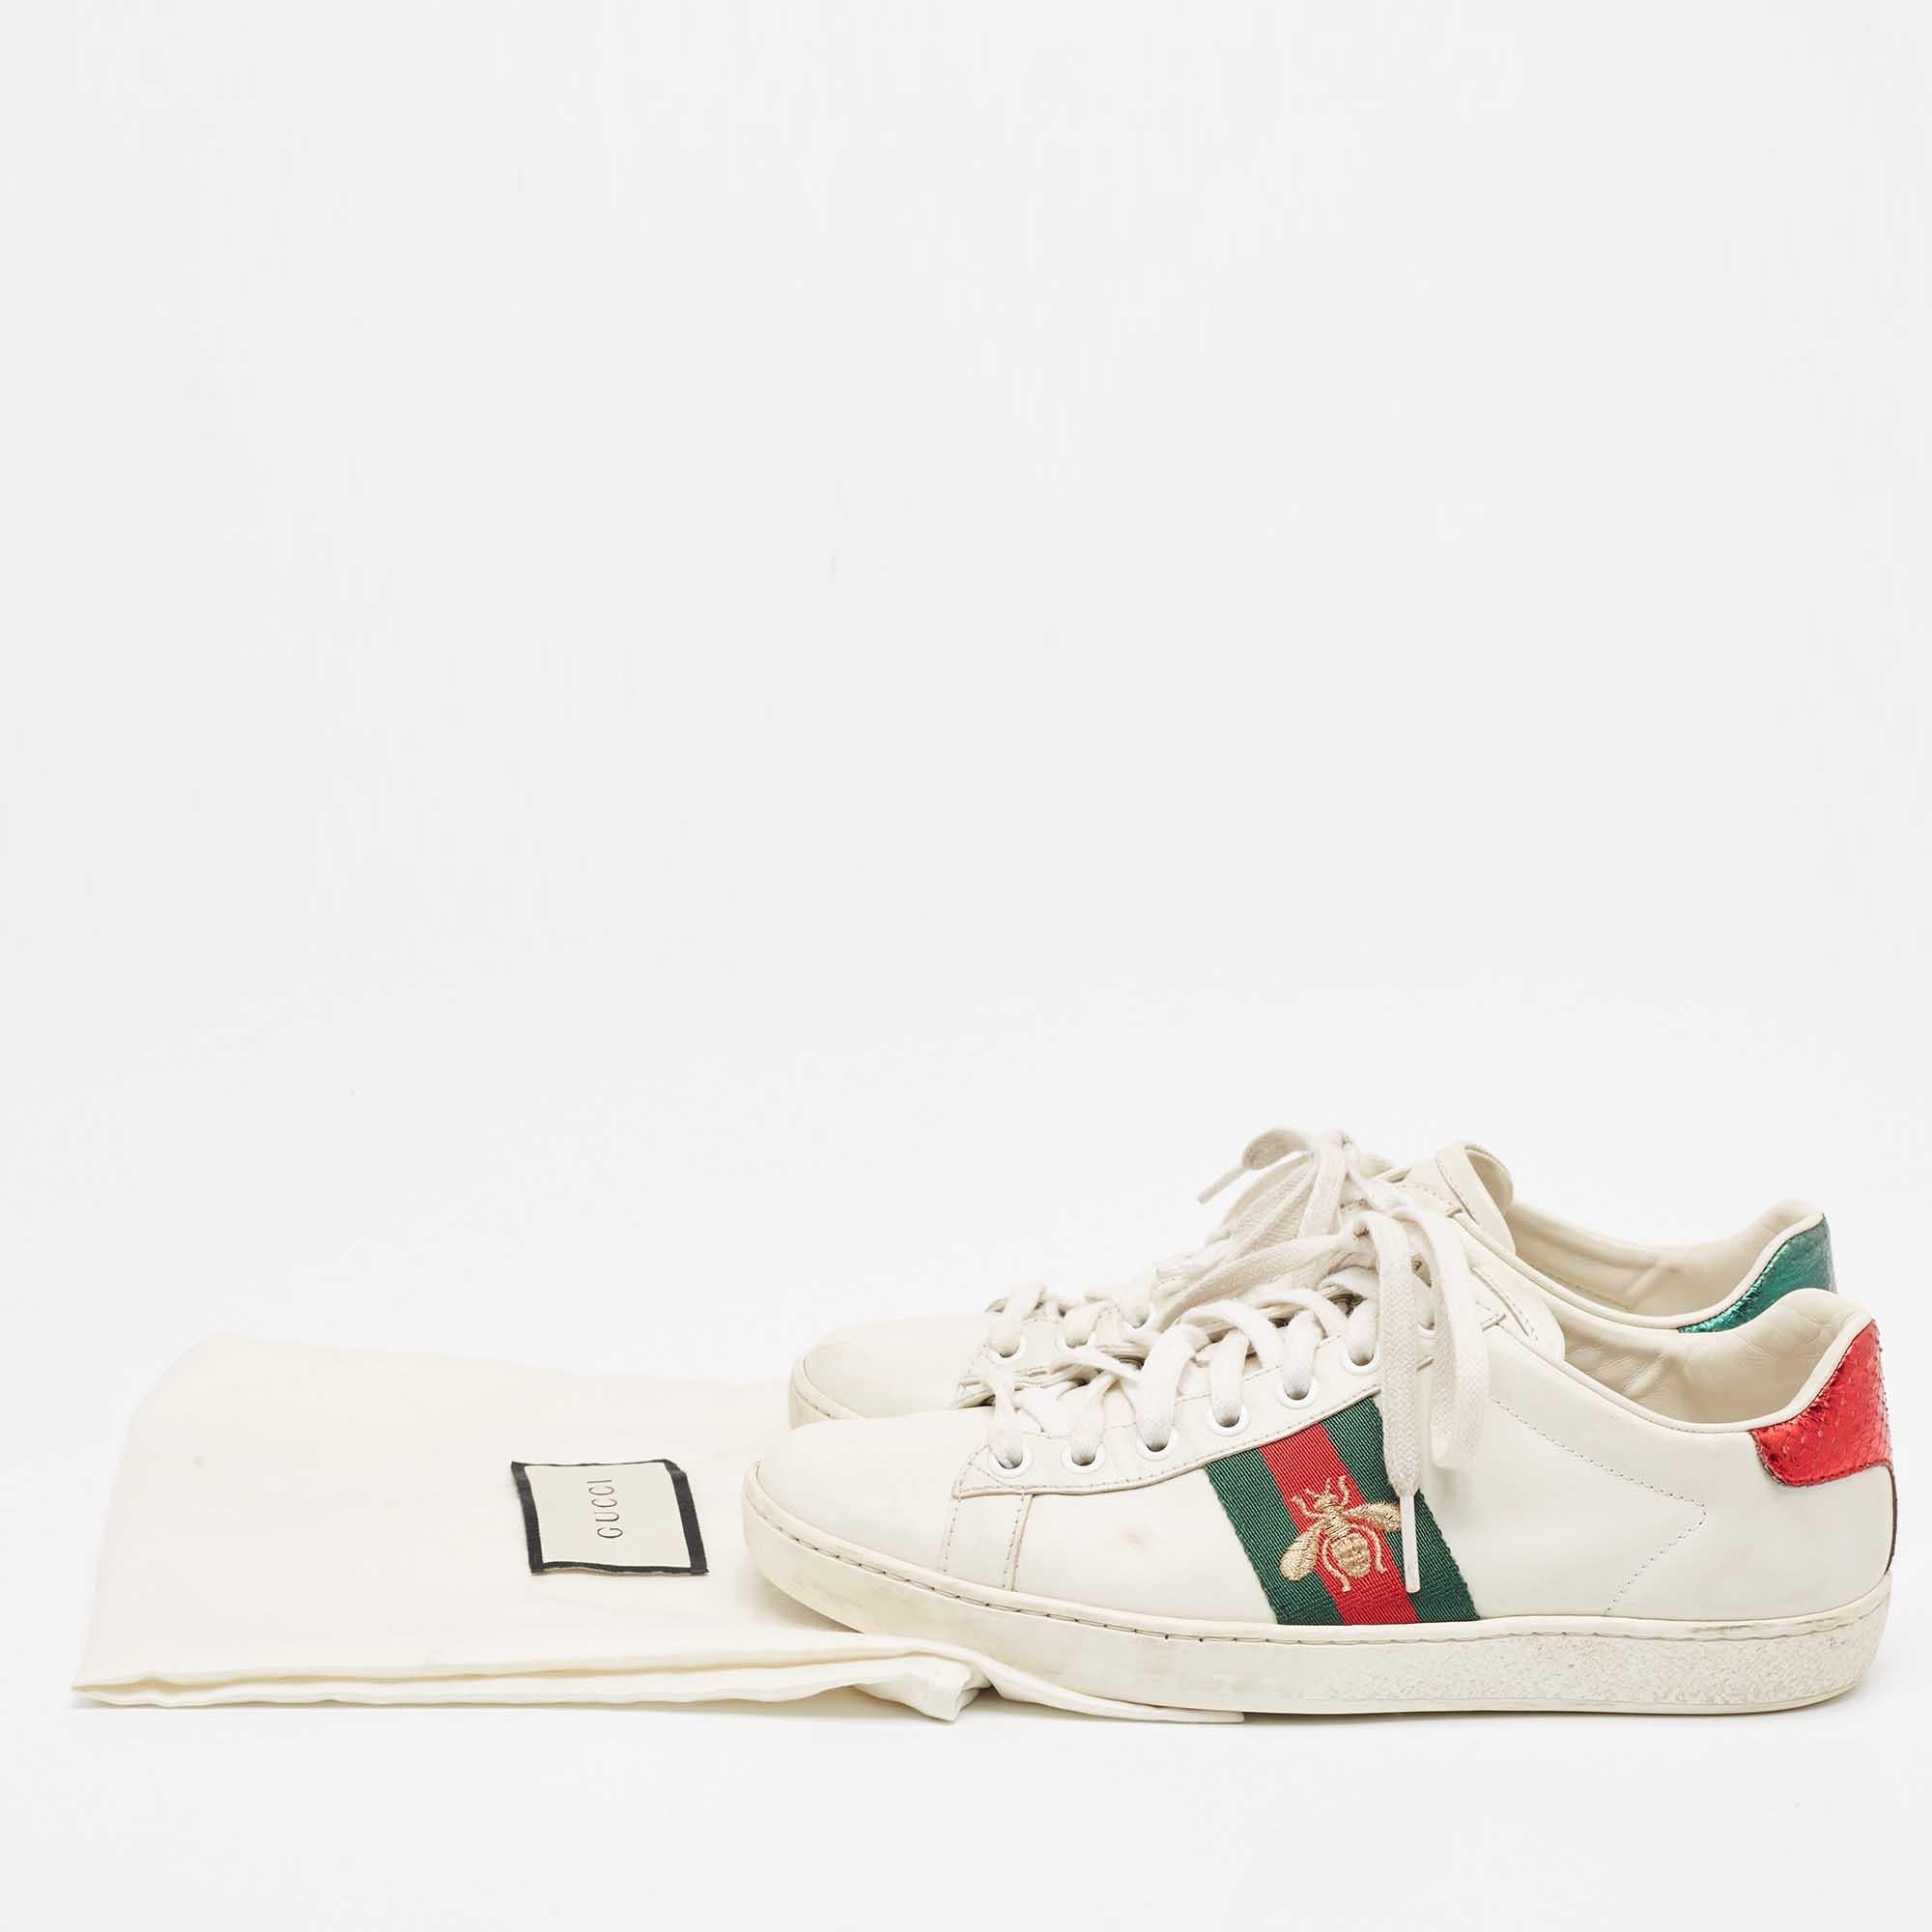 Gucci White Leather Embroidered Bee Ace Sneakers Size 36 For Sale 5